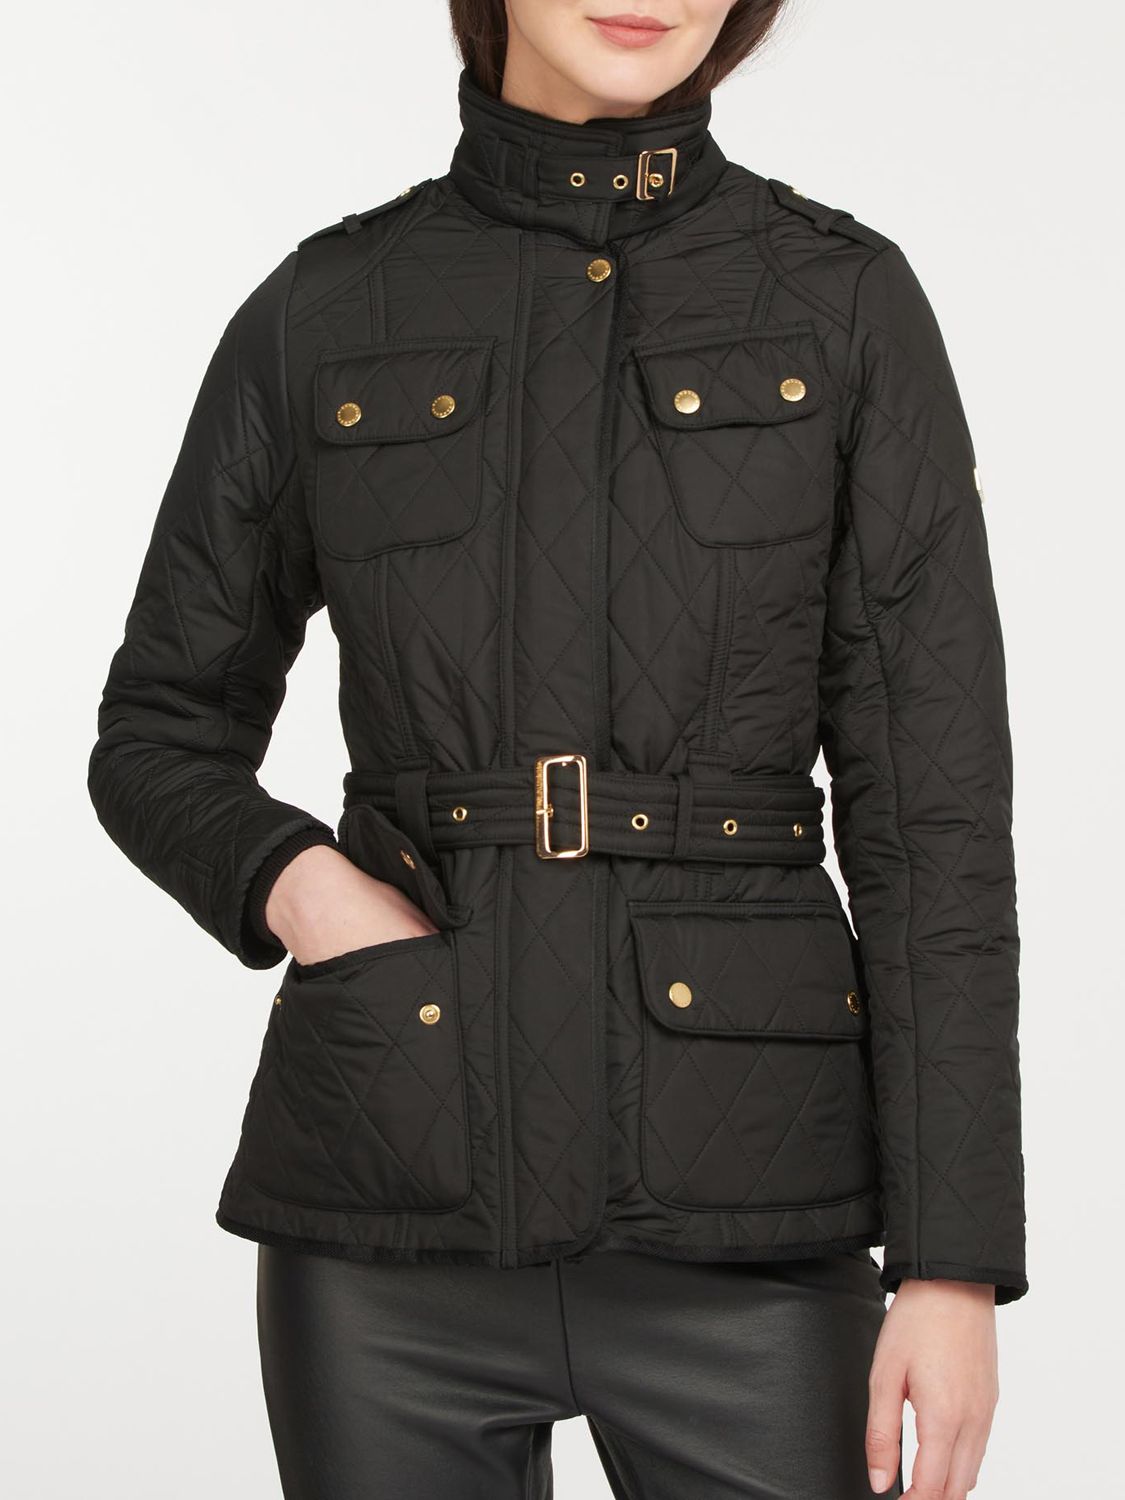 john lewis quilted coats